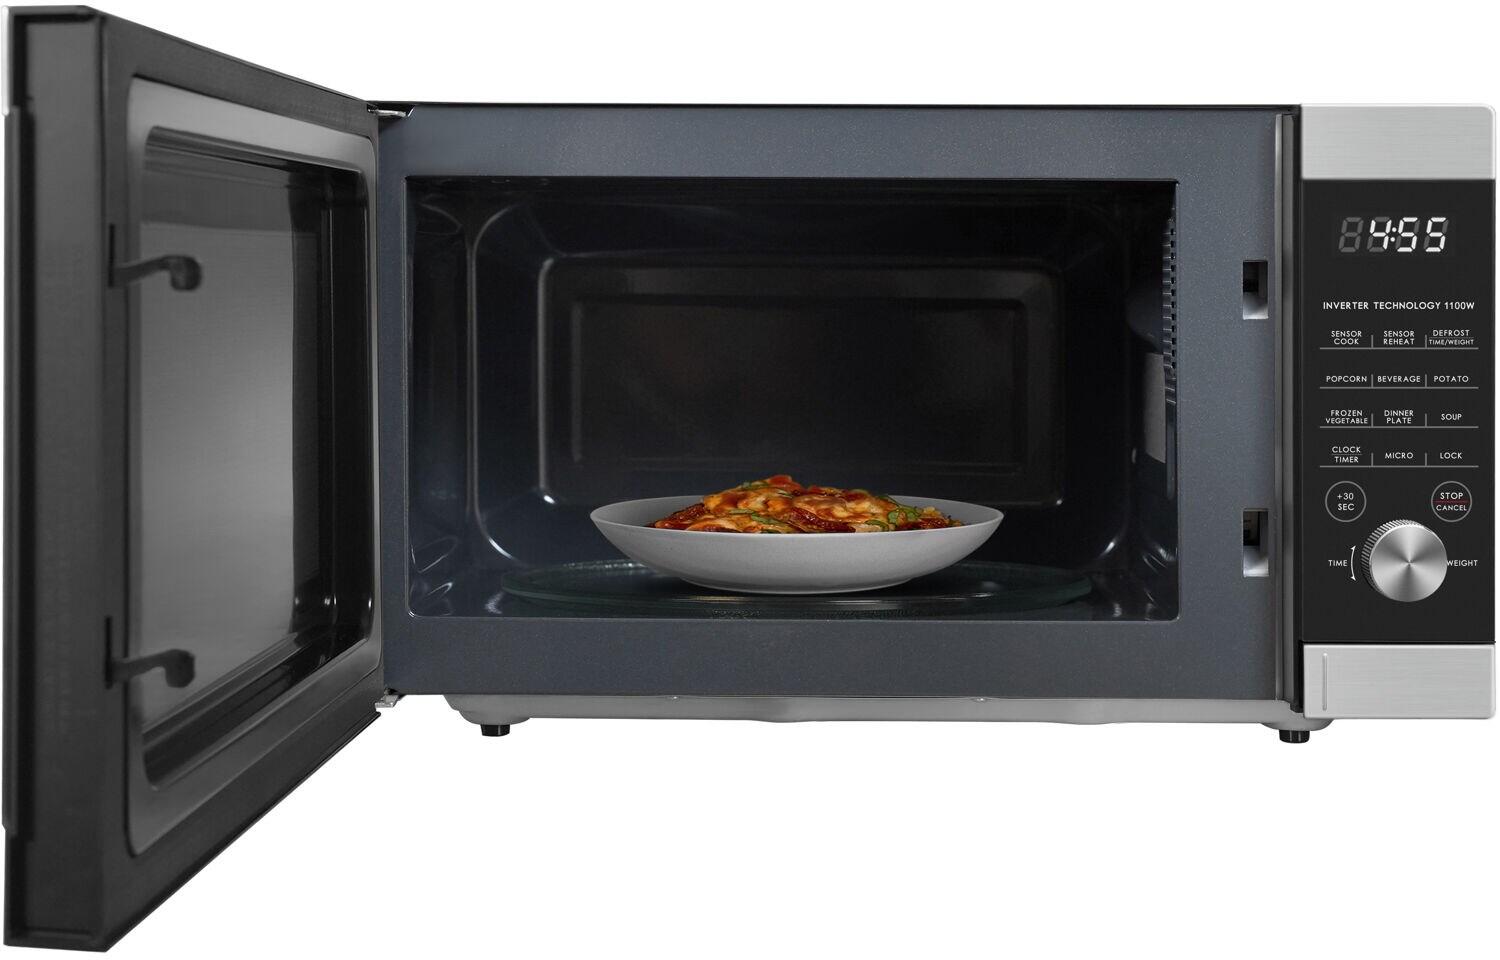 Galanz 2.2 Cu. Ft. ExpressWave Counter-top Microwave in Stainless Steel (GEWWD22S1SV125)